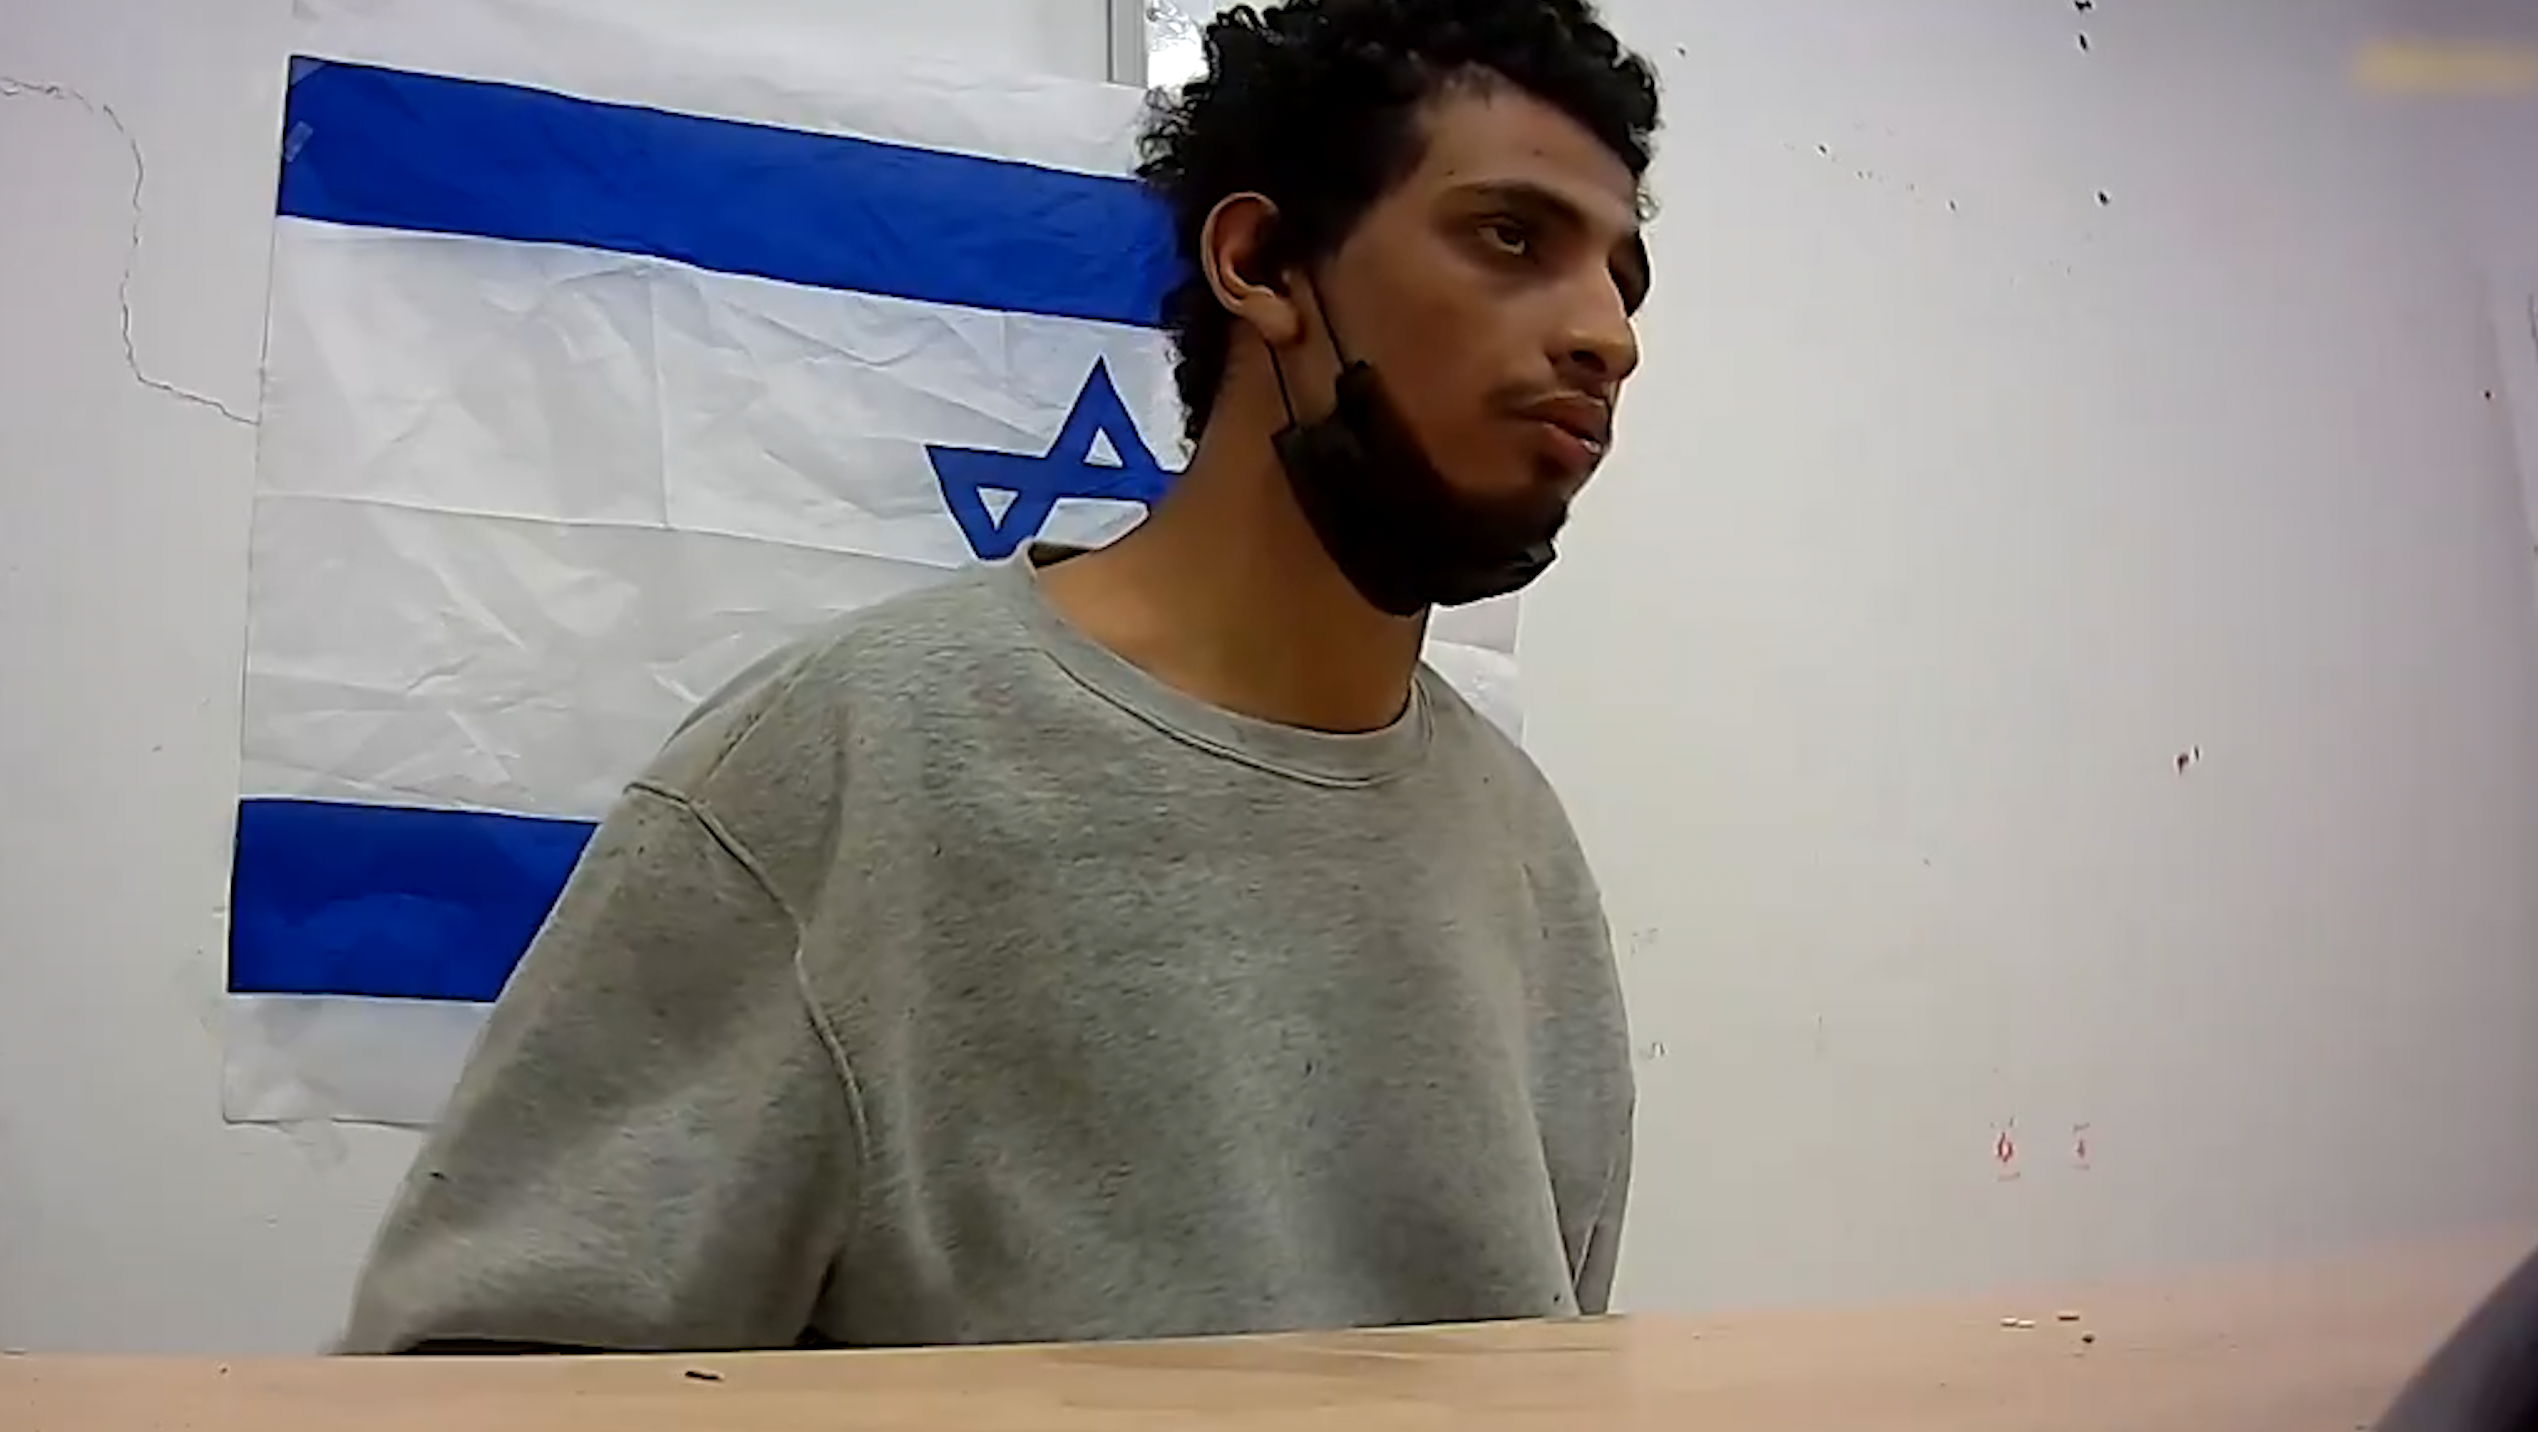 Terrorist confesses to assaulting girl in Israel attack on October 7th